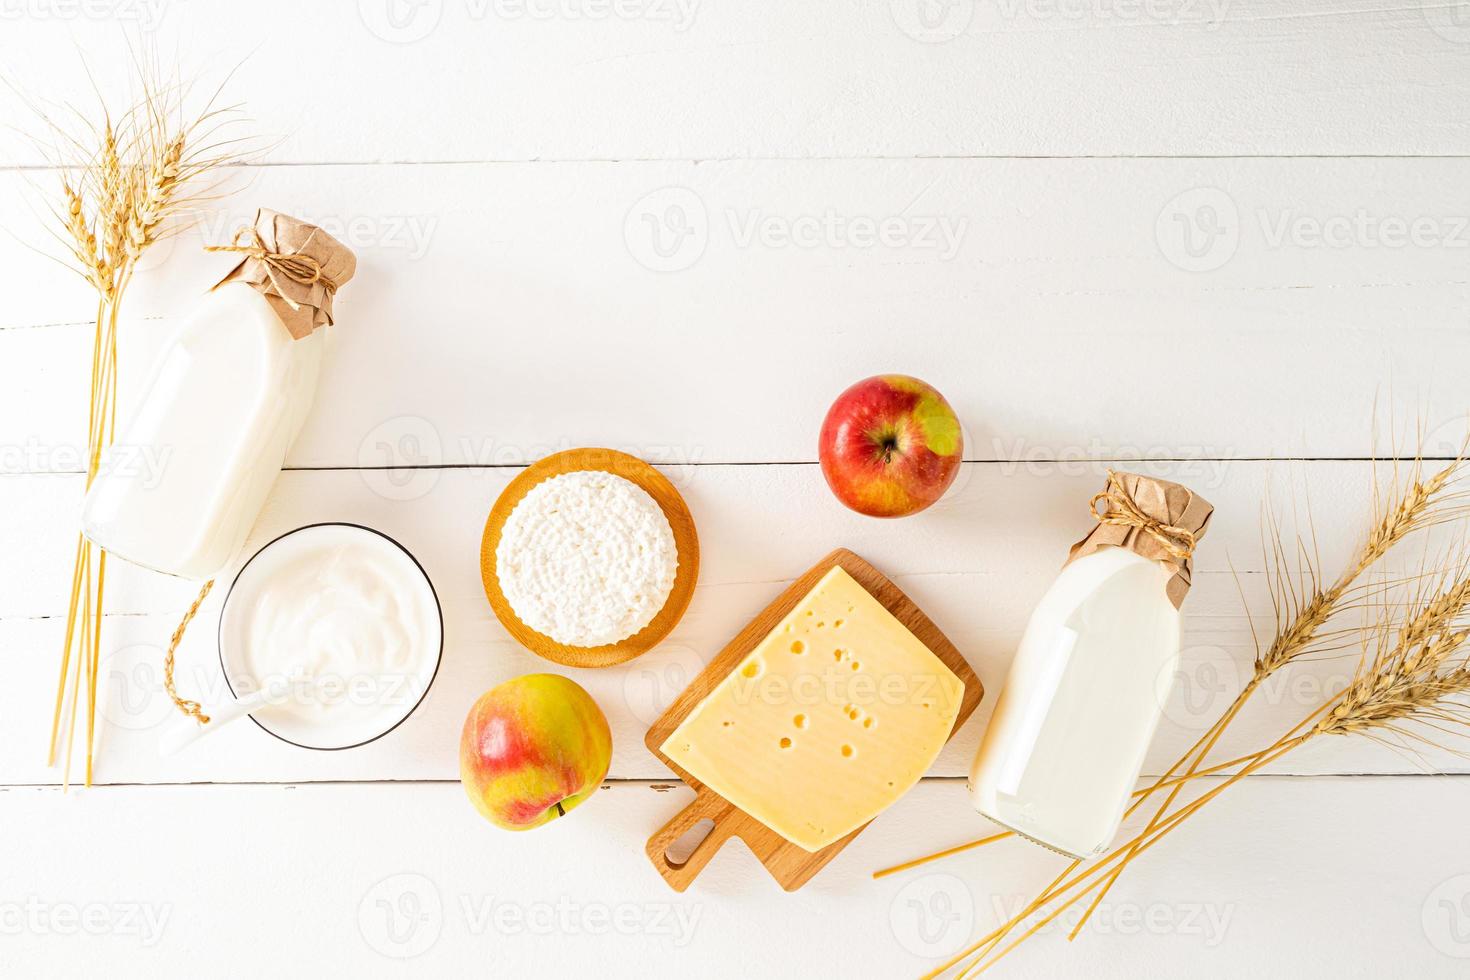 traditional dairy products, milk, sour cream, apples on a white wooden background made of boards with wooden letters of happy shavuot. top view. photo